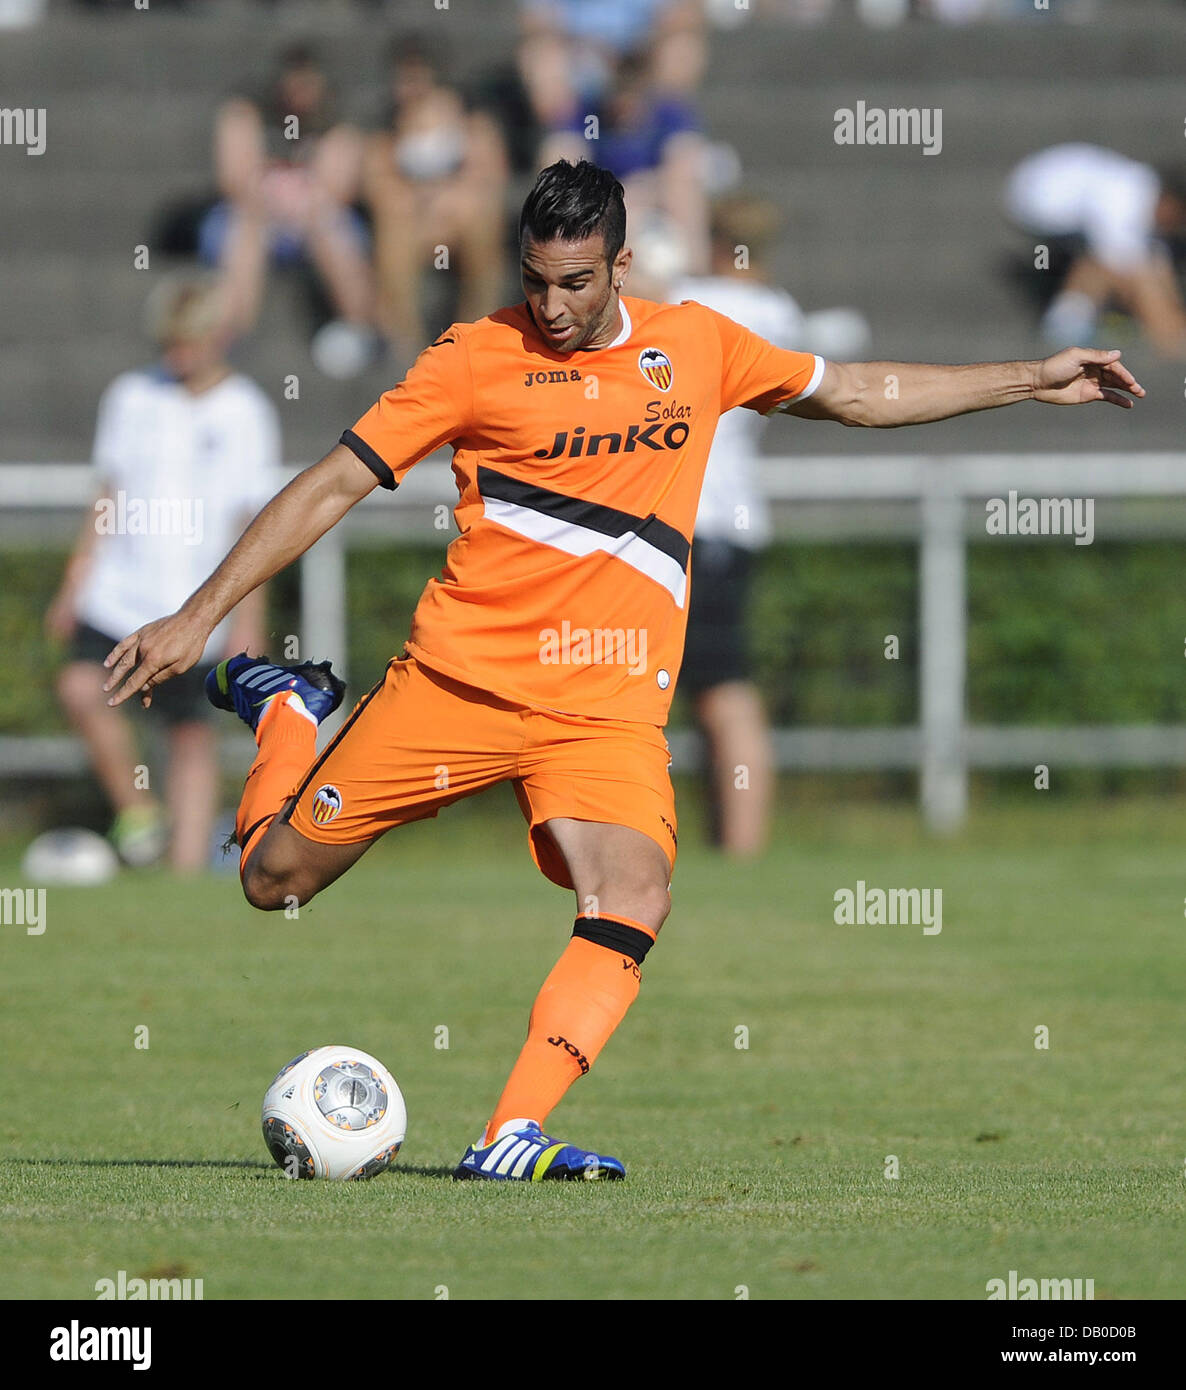 Ludwigsburg, Germany. 20th July, 2013. Adil Rami of Valencia plays the ball during the test match VfB Stuttgart vs FC Valencia in the Ludwig-Jahn-Stadion in Ludwigsburg, Germany, 20 July 2013. Photo: DANIEL MAURER/dpa/Alamy Live News Stock Photo